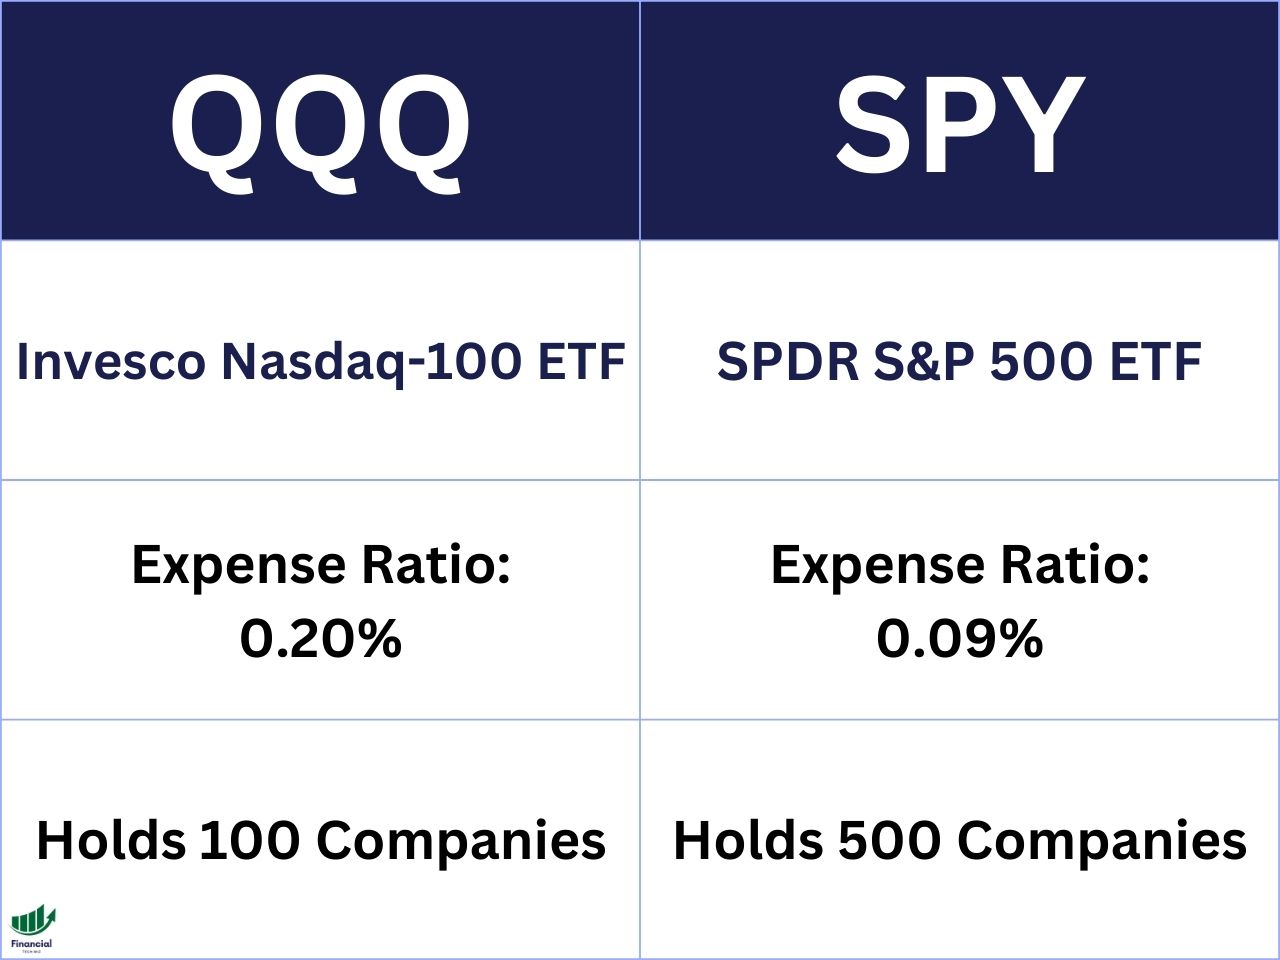 Does the] S&P include QQQ 100 and dow 30 stock 